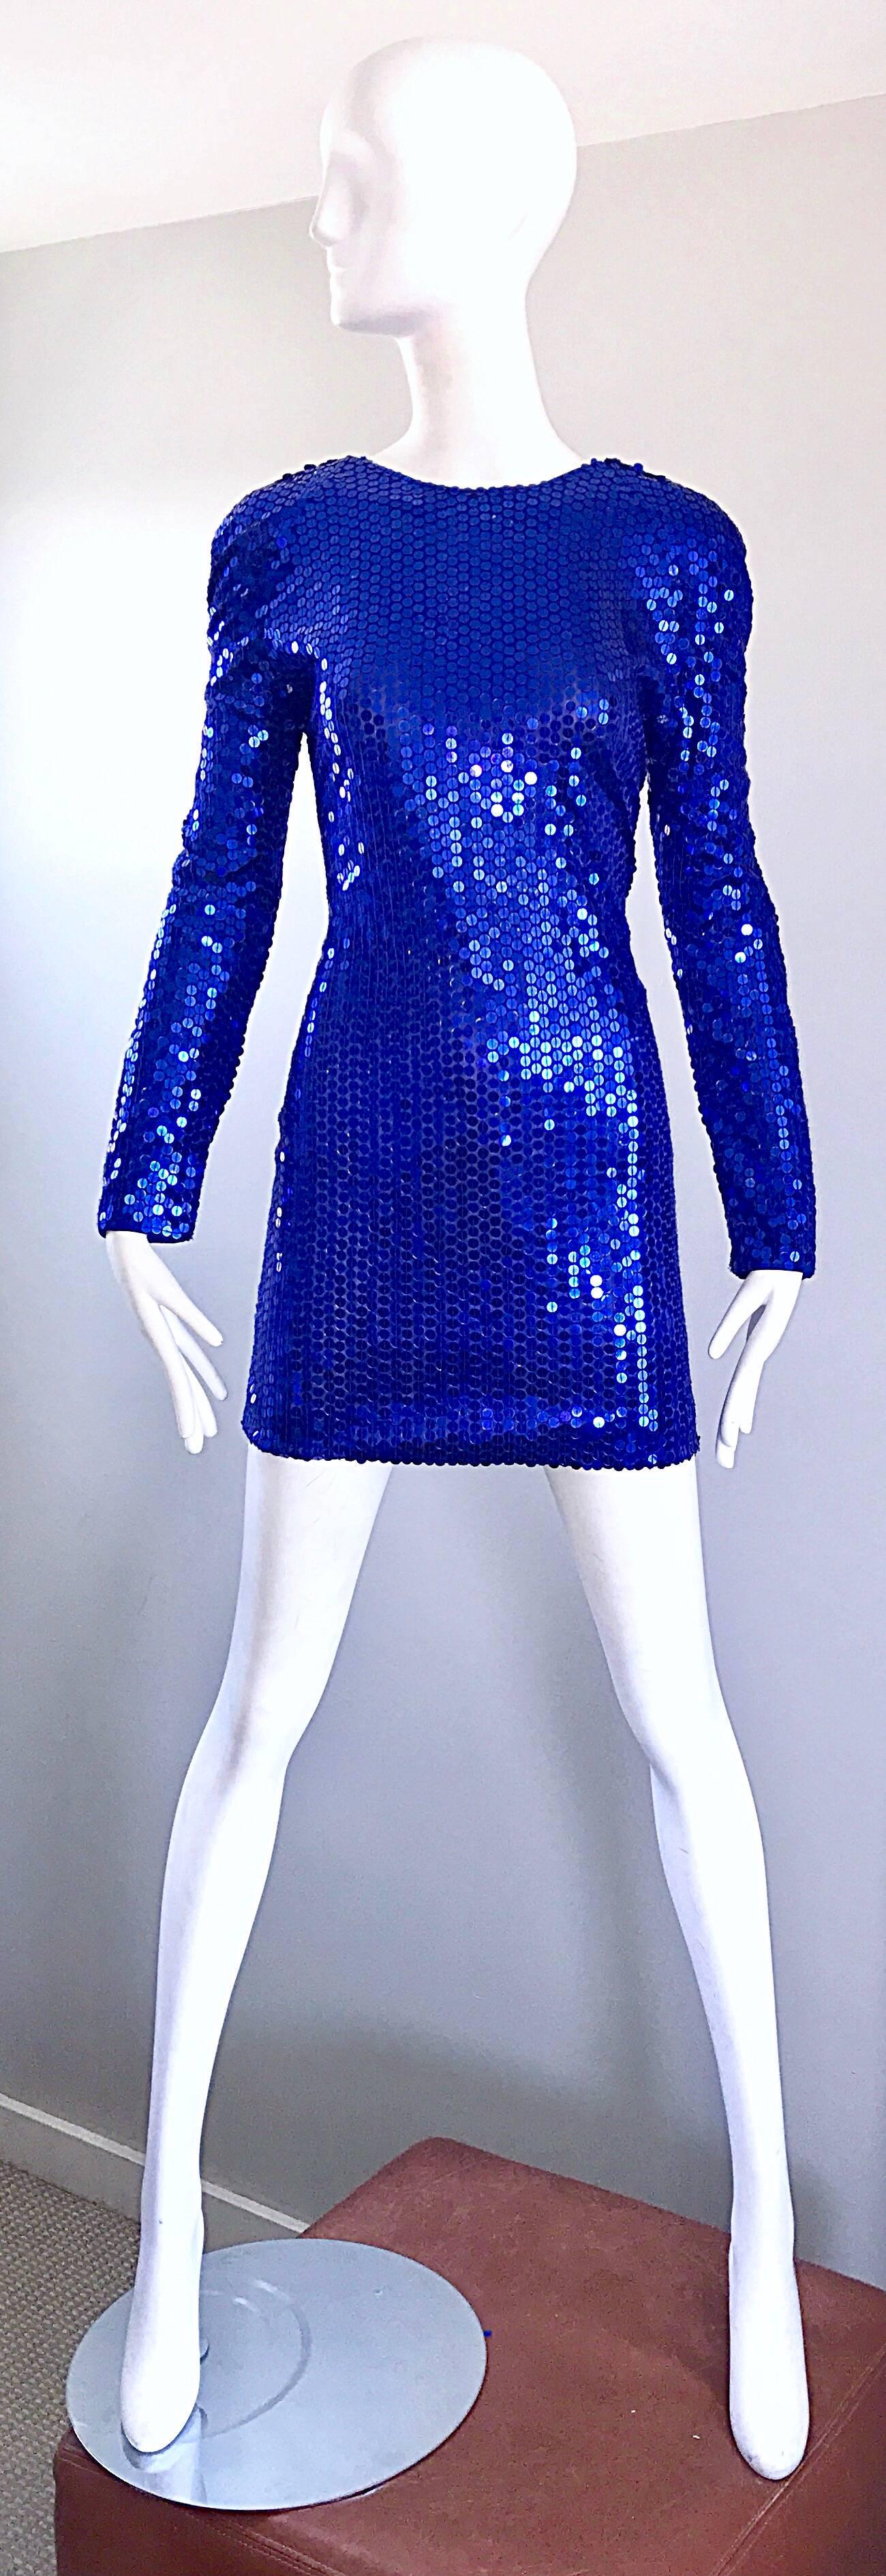 Sexy 1990s LILLIE RUBIN royal blue sequined long sleeve bodycon mini dress. Wonderful tailored fit with a low cut back. Hidden zipper up the back with hook-and-eye closure. Great belted or alone with heels or boots. Super comftorable jersey